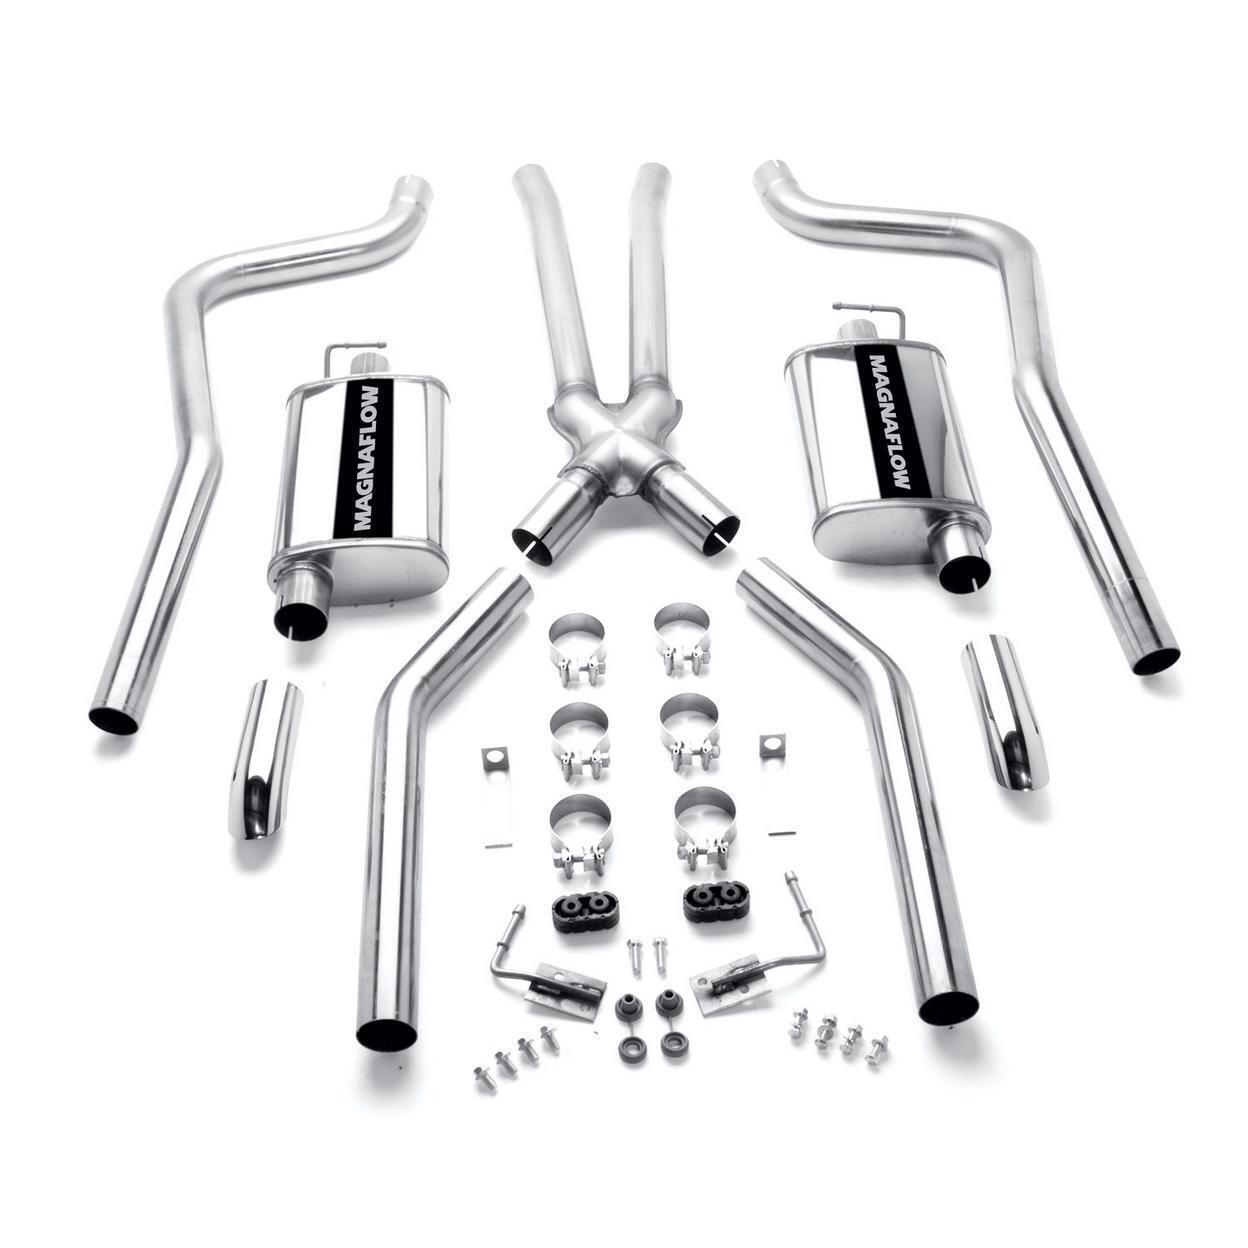 Exhaust System Kit for 1970 Plymouth Barracuda 6.3L V8 GAS OHV